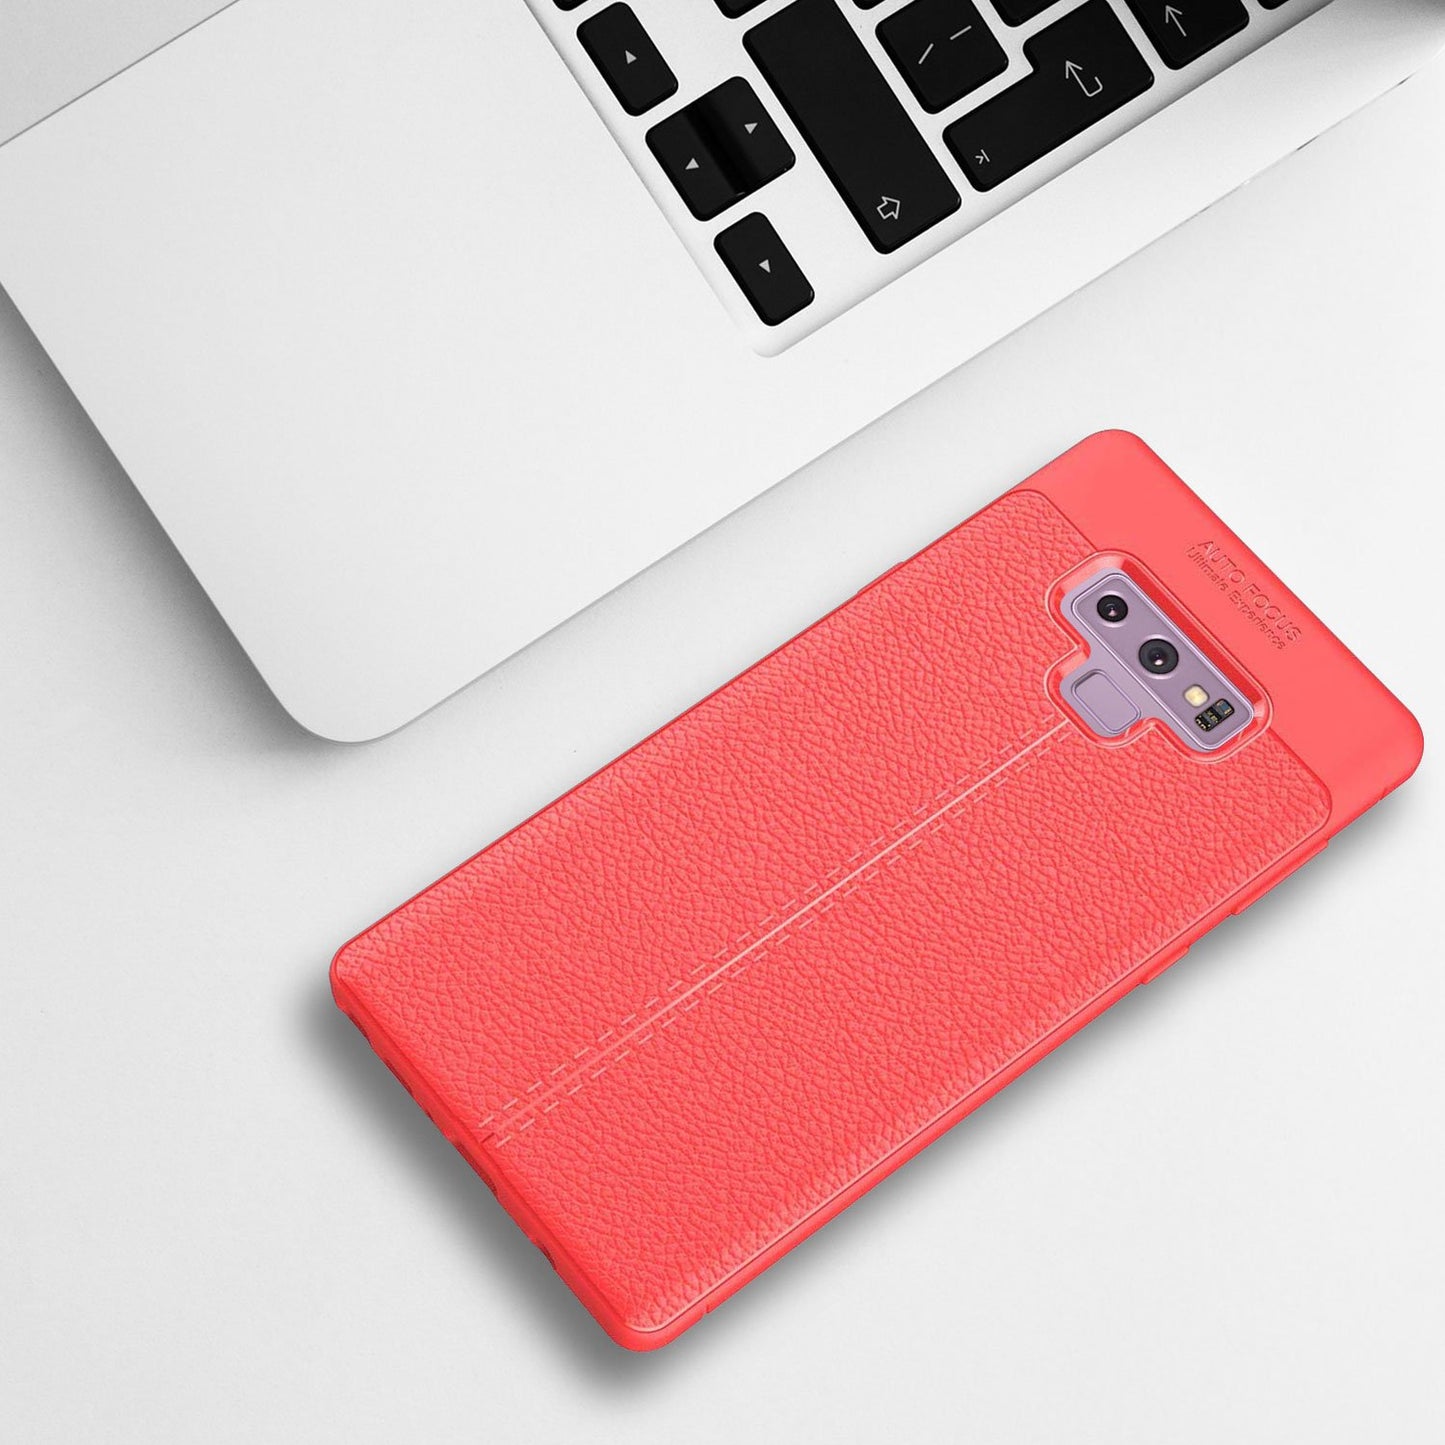 CCSAMN9RD - Slim Flexible Protecting Case Cover - Red - Galaxy Note 9